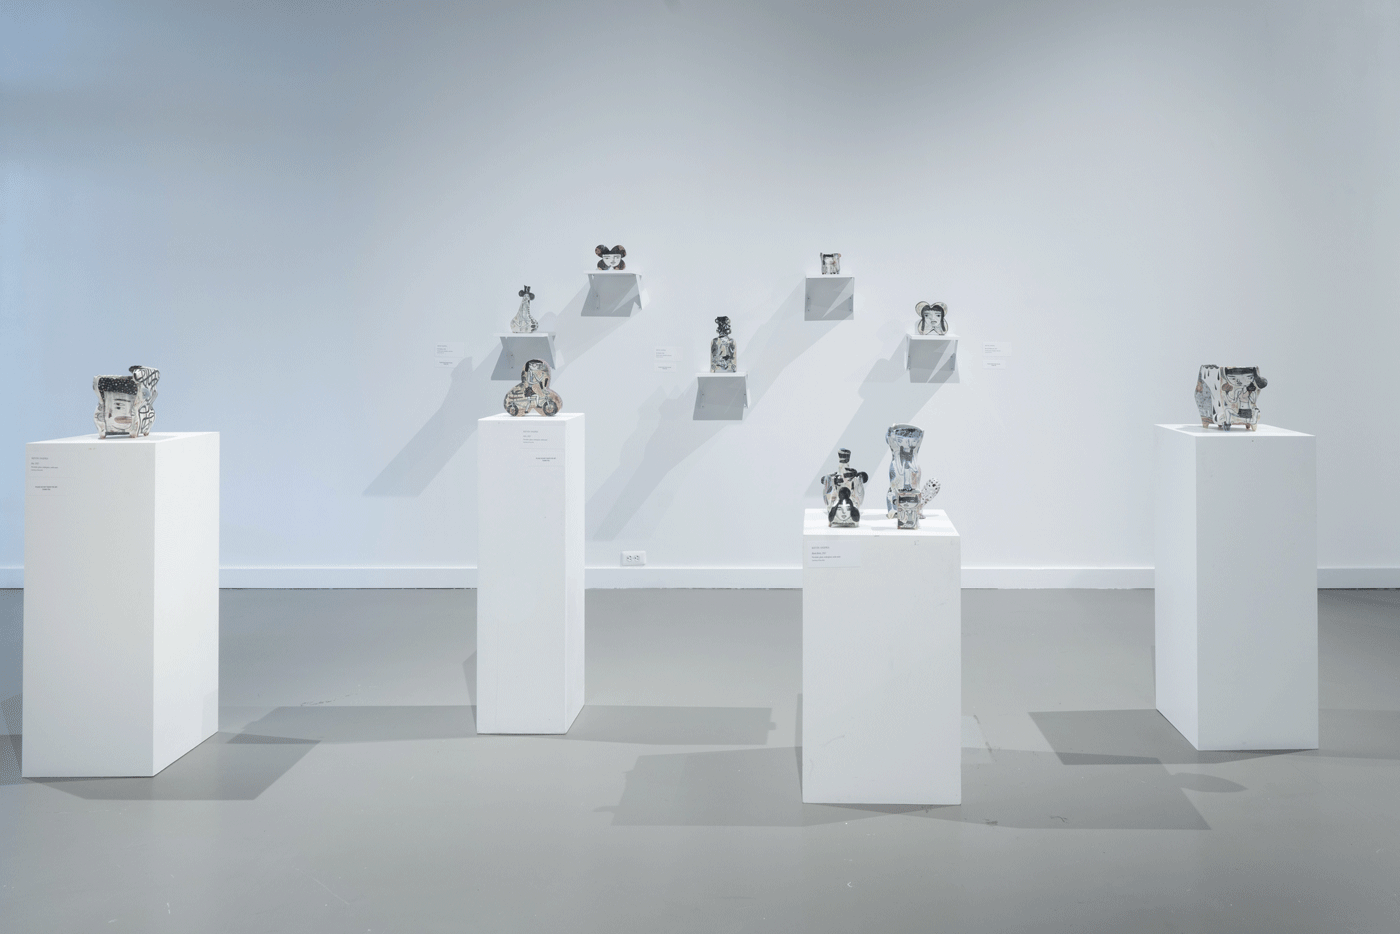 Small sculptures sit on white pedestals and are mounted on the wall